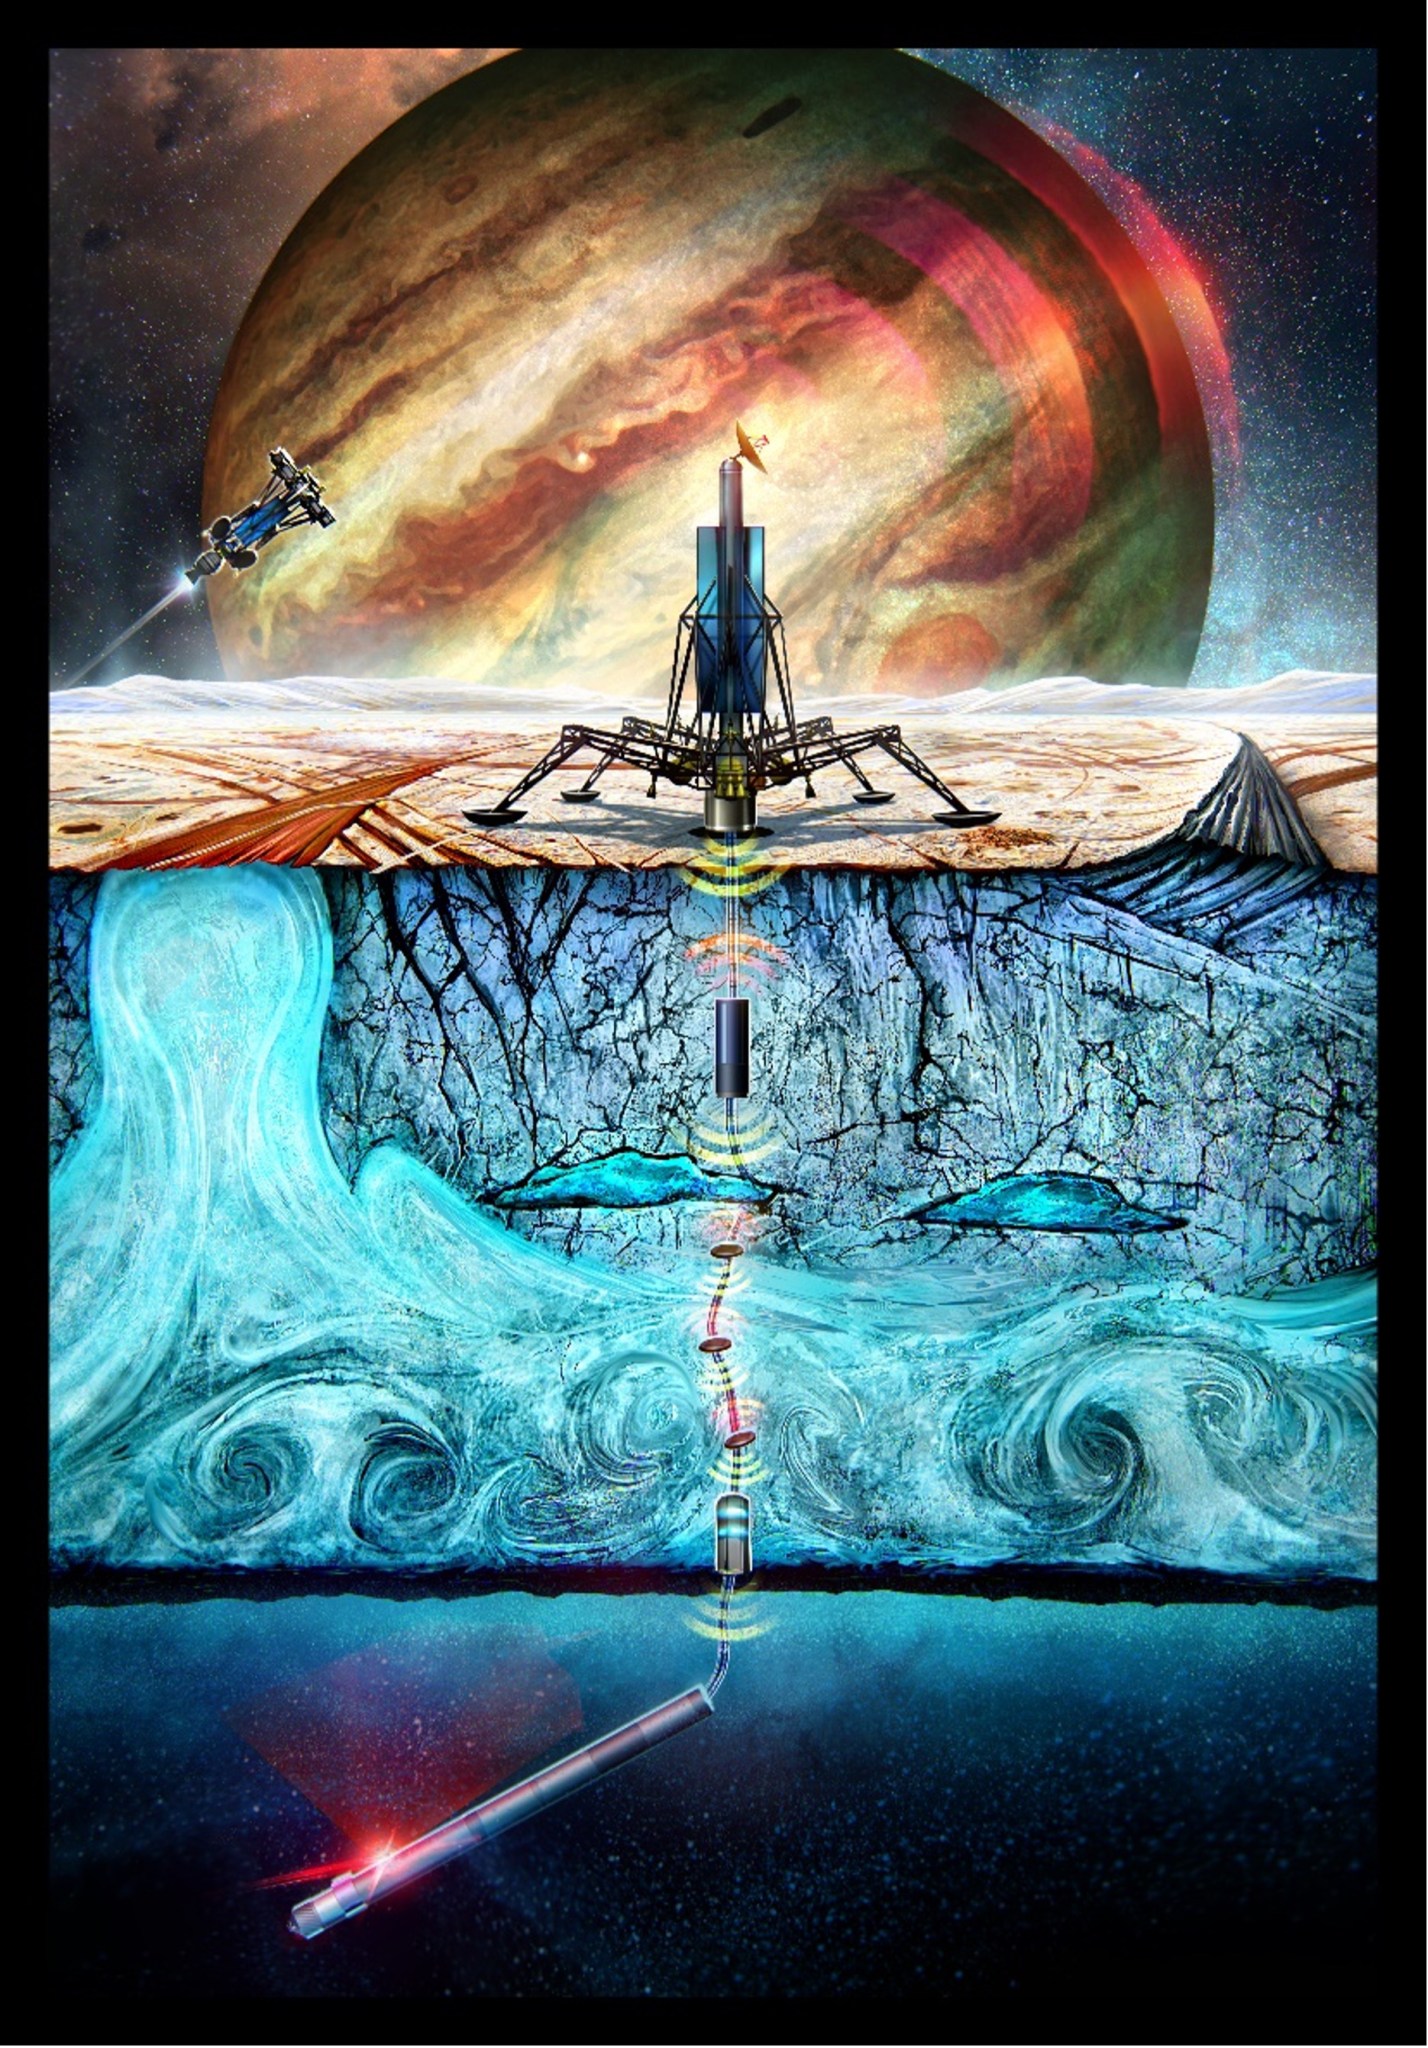 a cross section depicting three regions: a dark bottom ocean region with a silver cylindrical probe, a middle icy section with blue swirls through which the probe’s tether travels, and a top image depicting the surface on which is perched a lander vehicle with multiple legs and an antenna. In the background behind the lander, a multicolored planet dominates the sky.